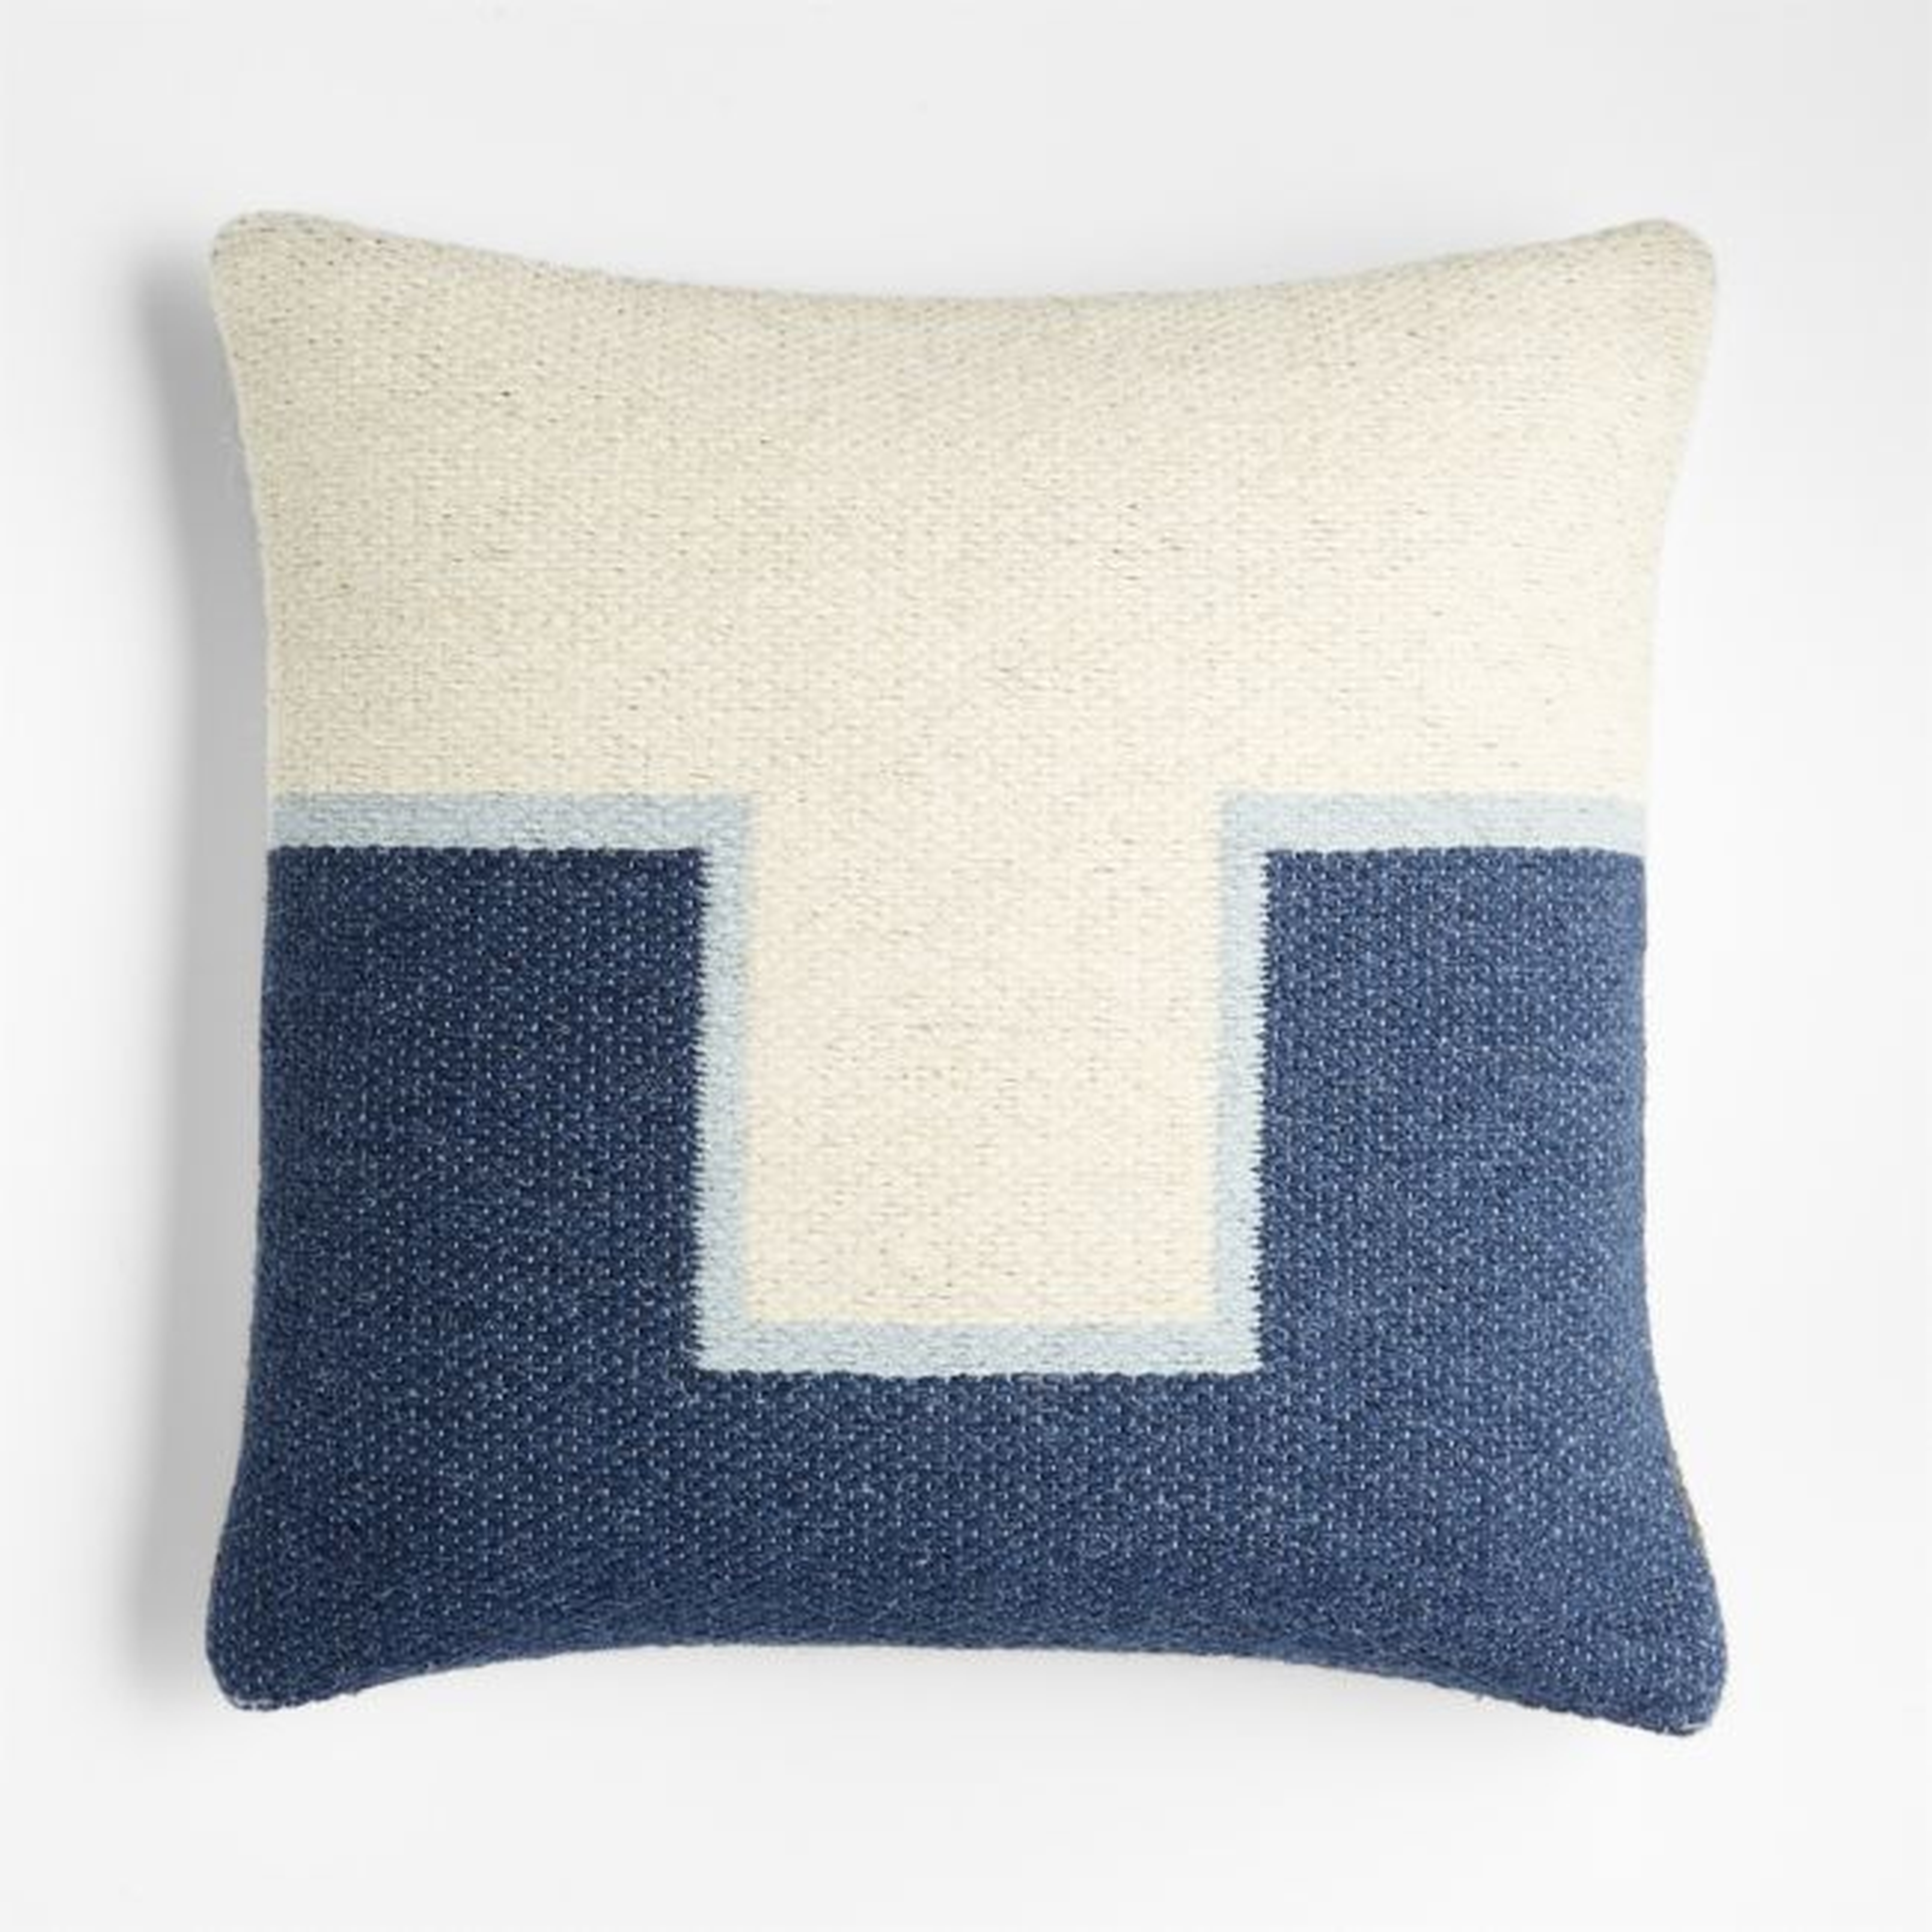 Ansom Pillow Cover, Indigo, 20' x 20" - Crate and Barrel